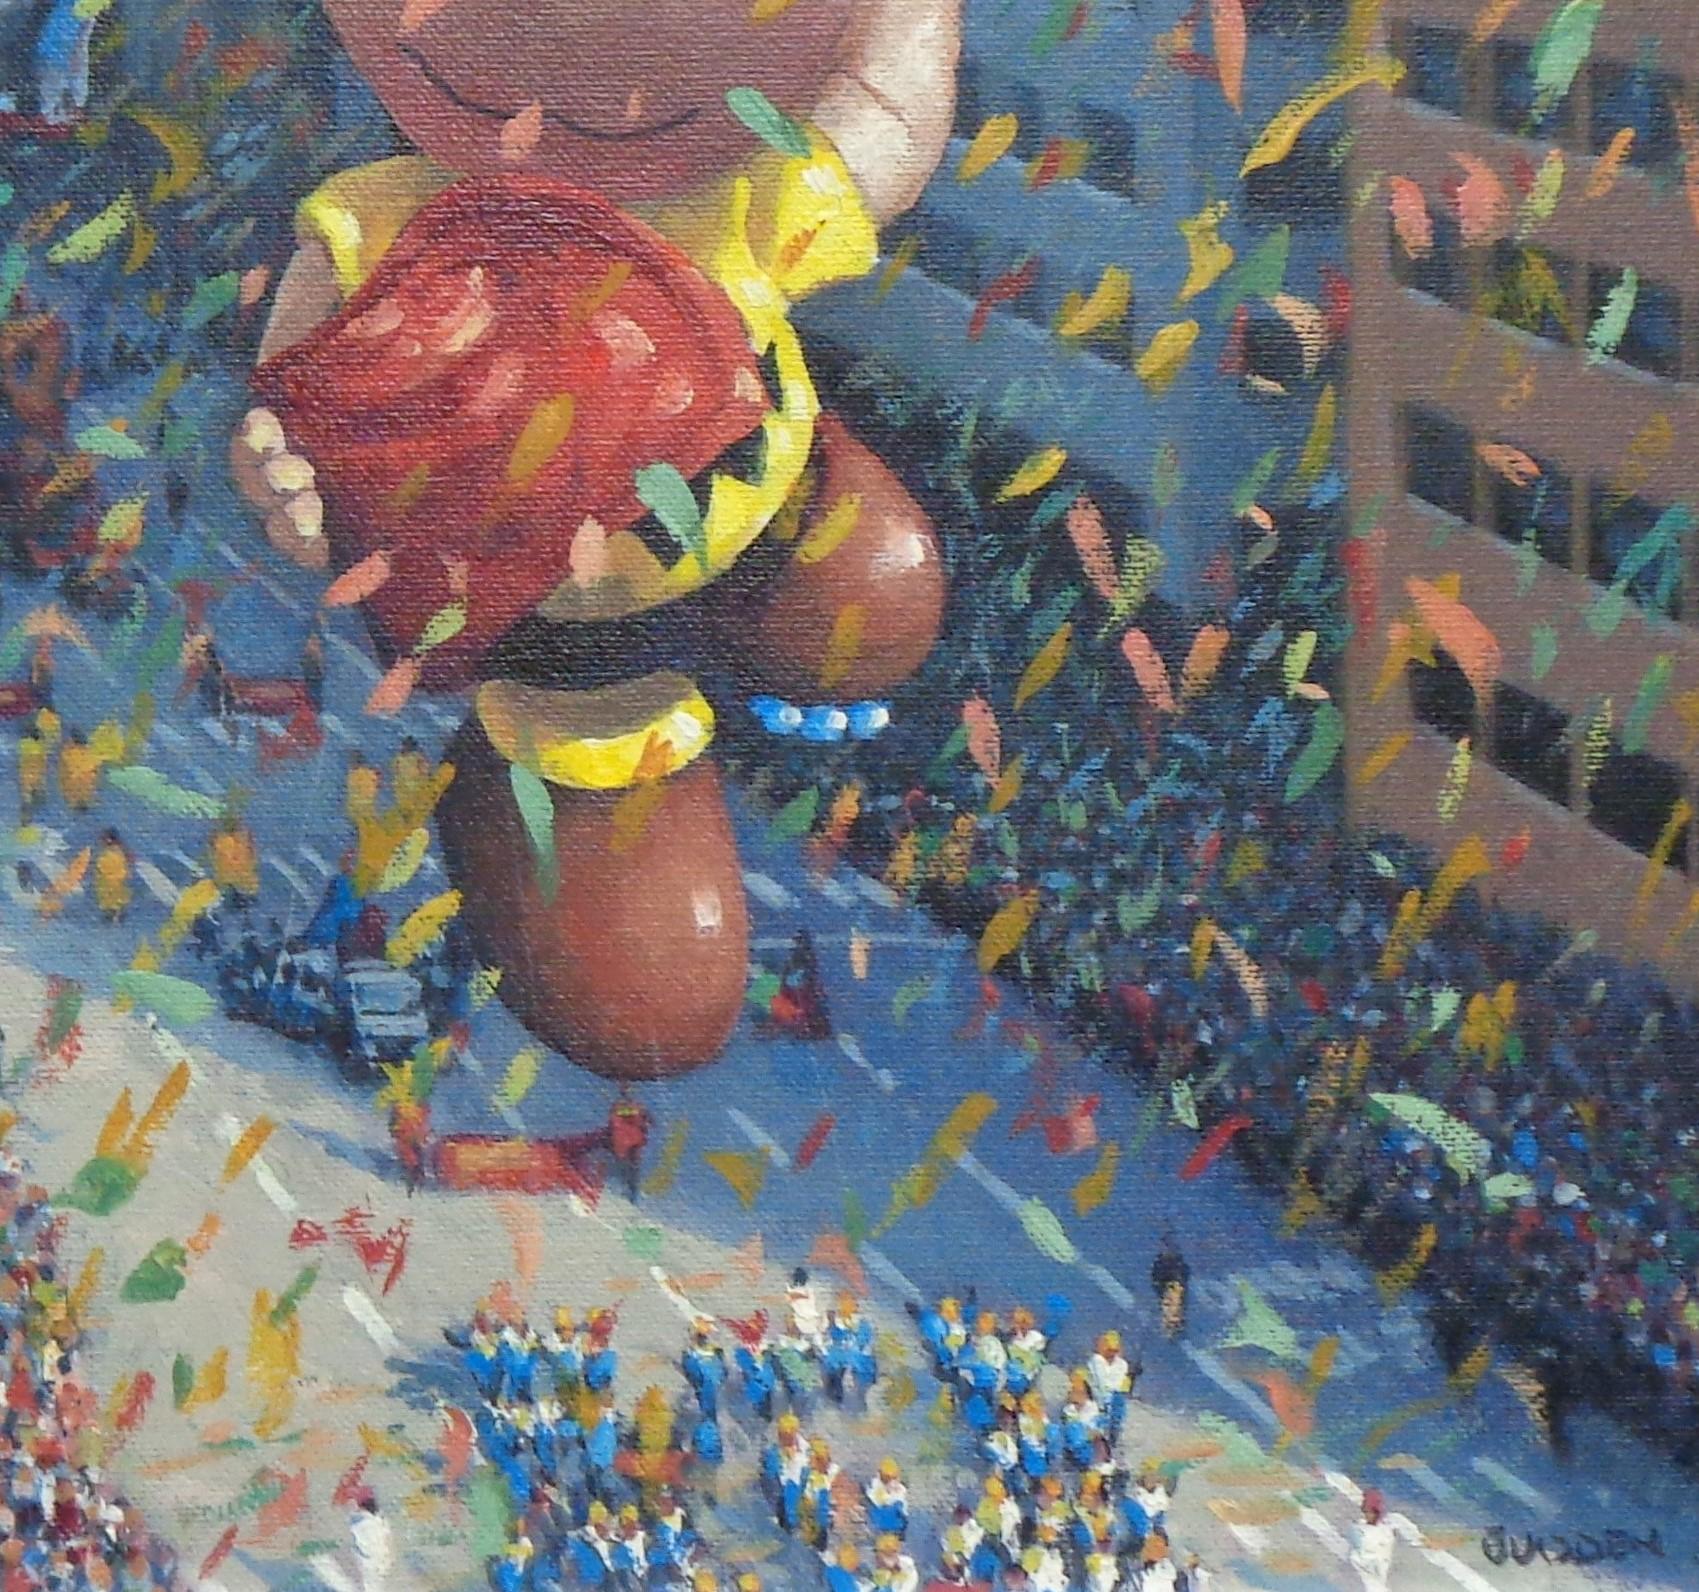   NYC Landscape Oil Painting Michael Budden Macy's Parade Series Charlie Brown For Sale 3